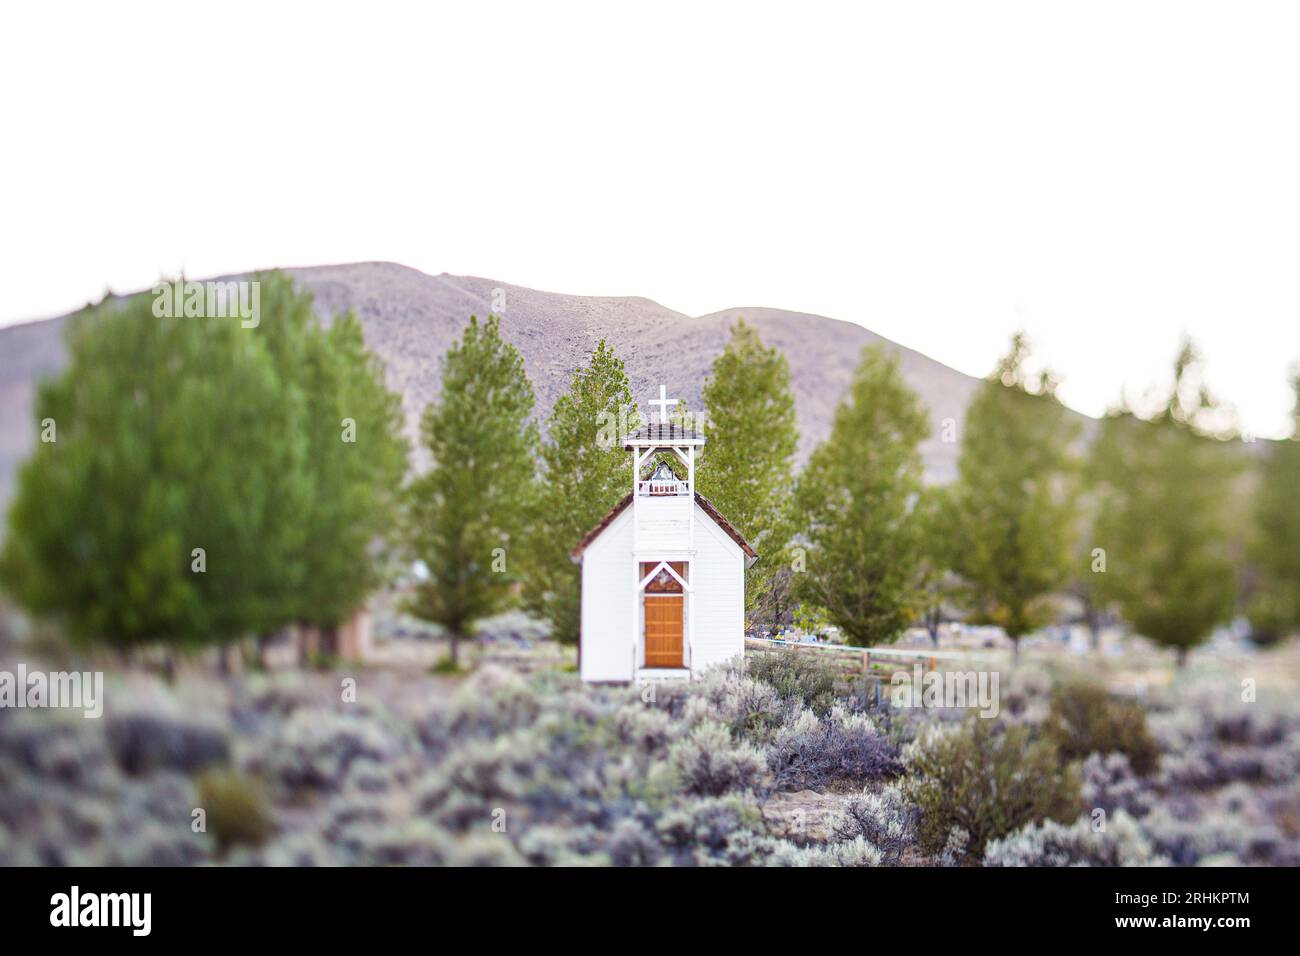 Photograph of a small Catholic Country Church in Doyle, CA landscape travel tilt-shift photography techniques Stock Photo